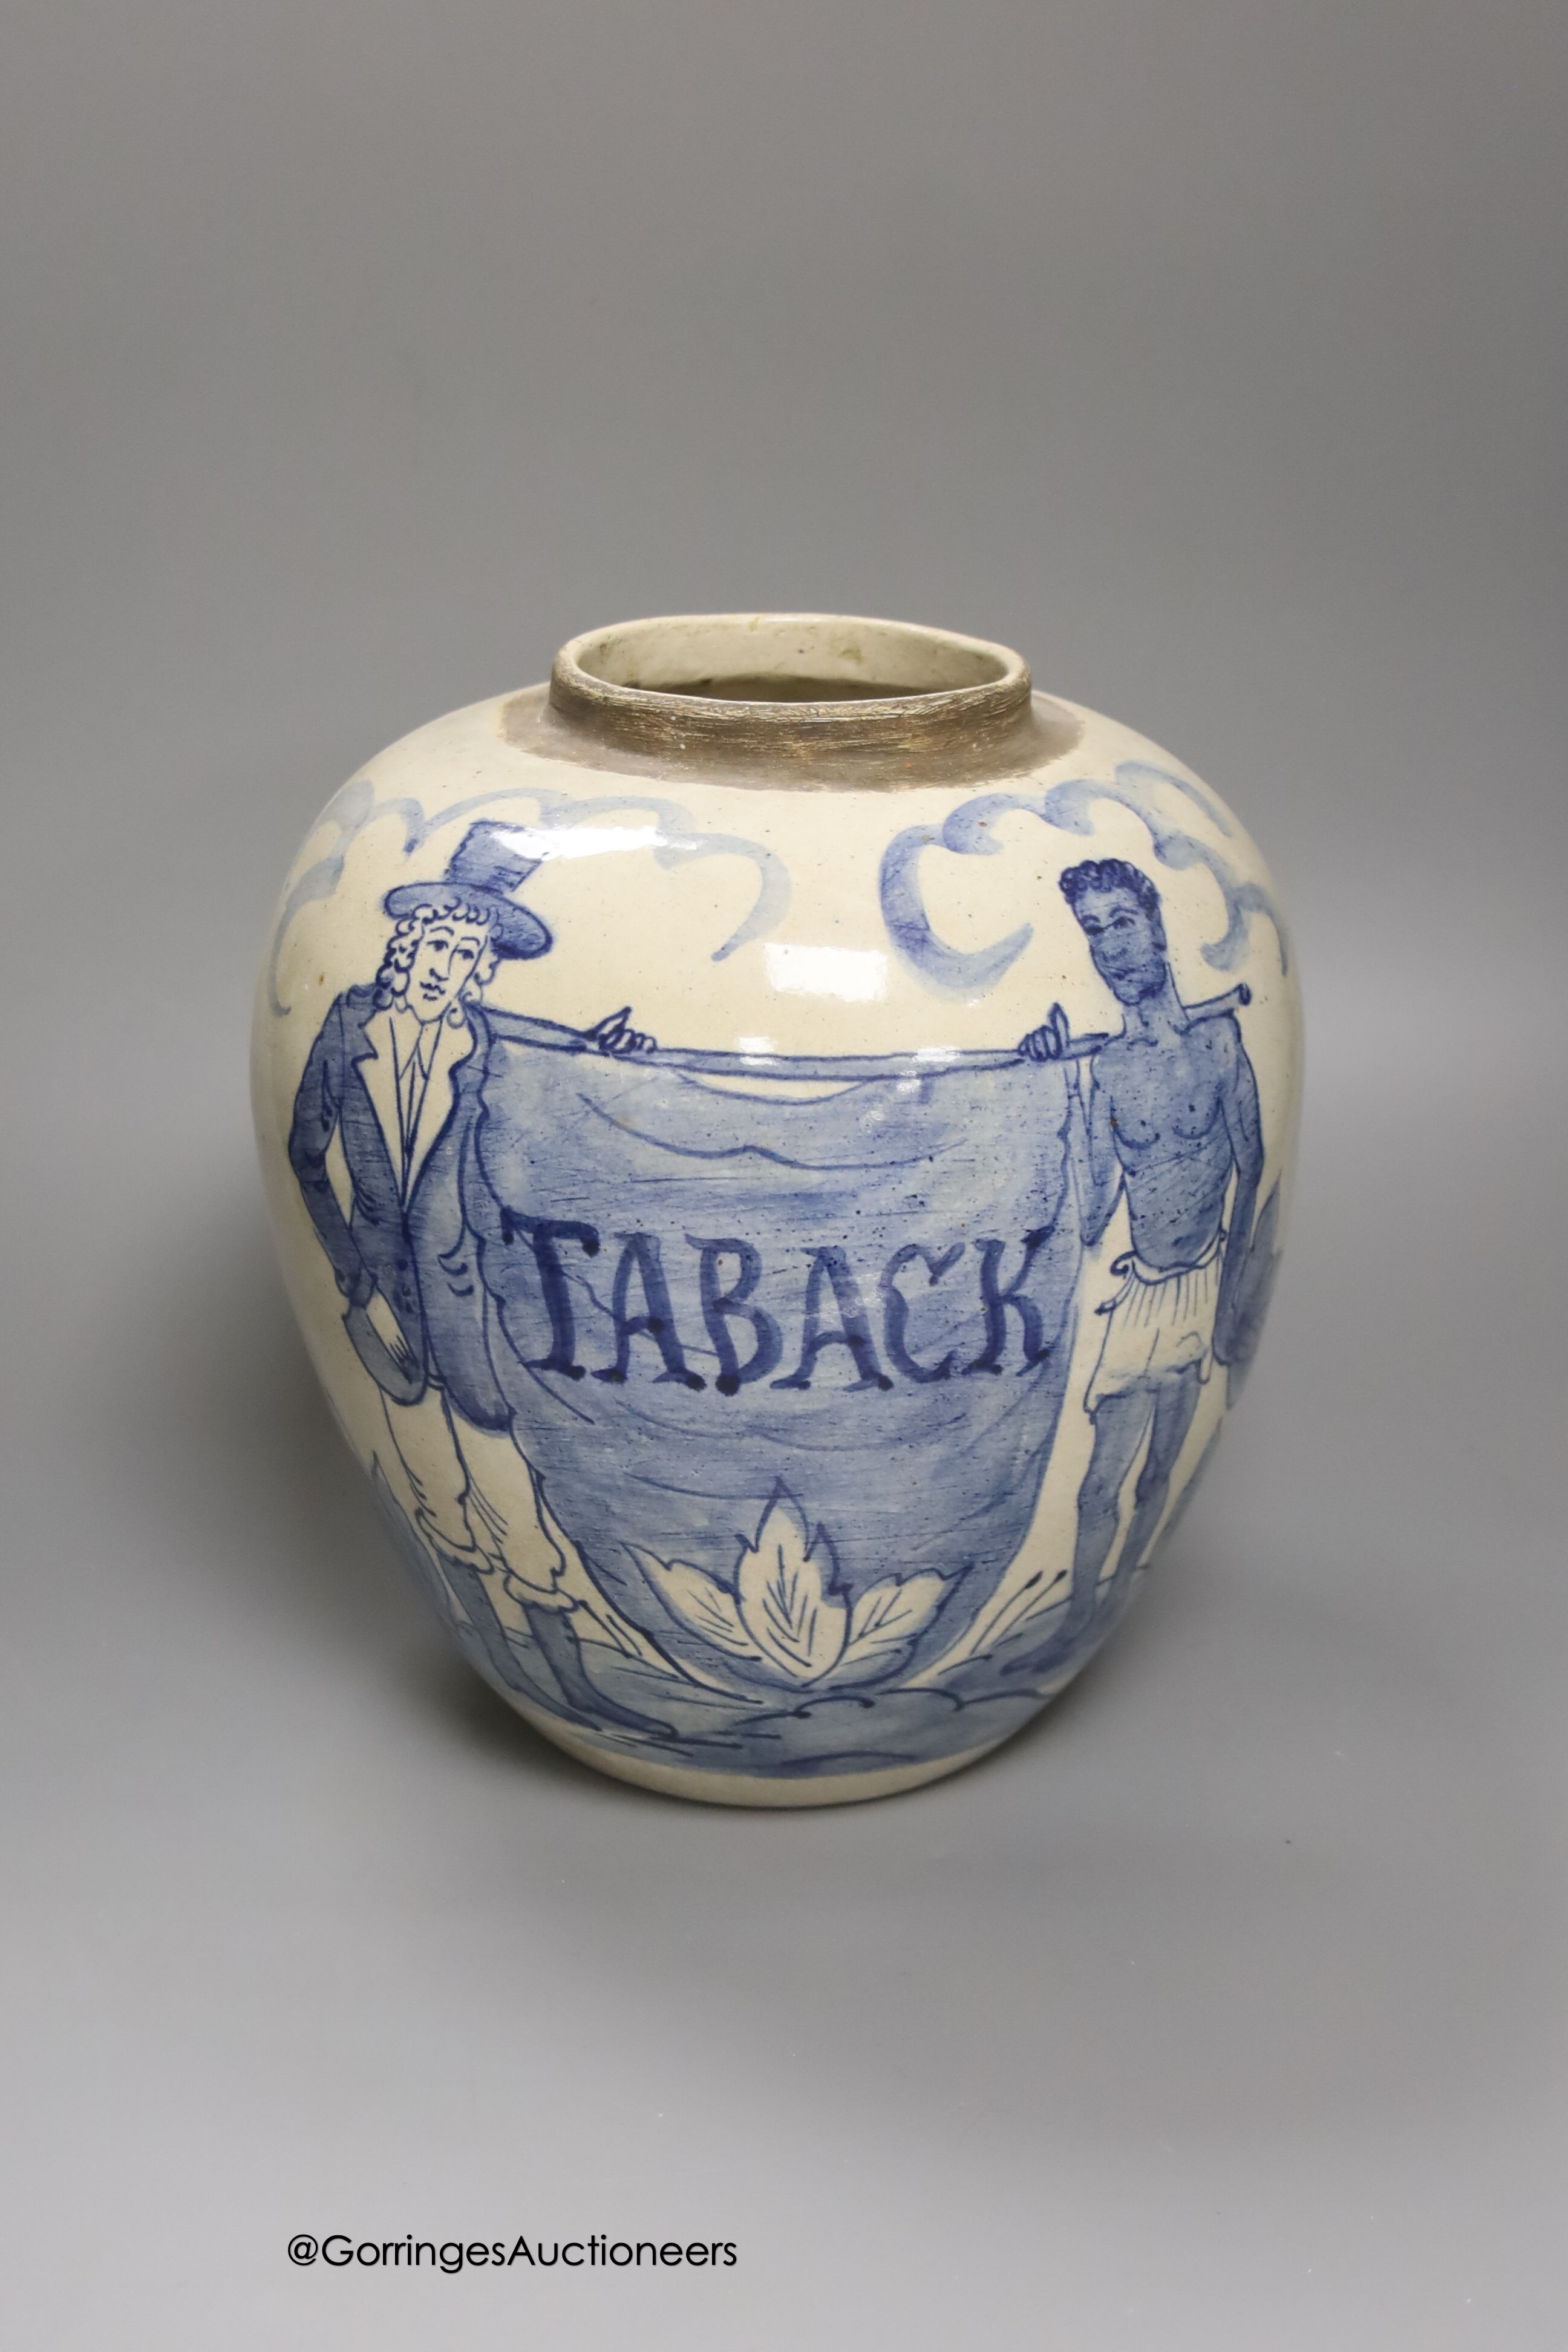 A tin-glazed terracotta barber's bowl dated 1819, a large ovoid eathenware ‘Taback’ jar and three - Image 8 of 10